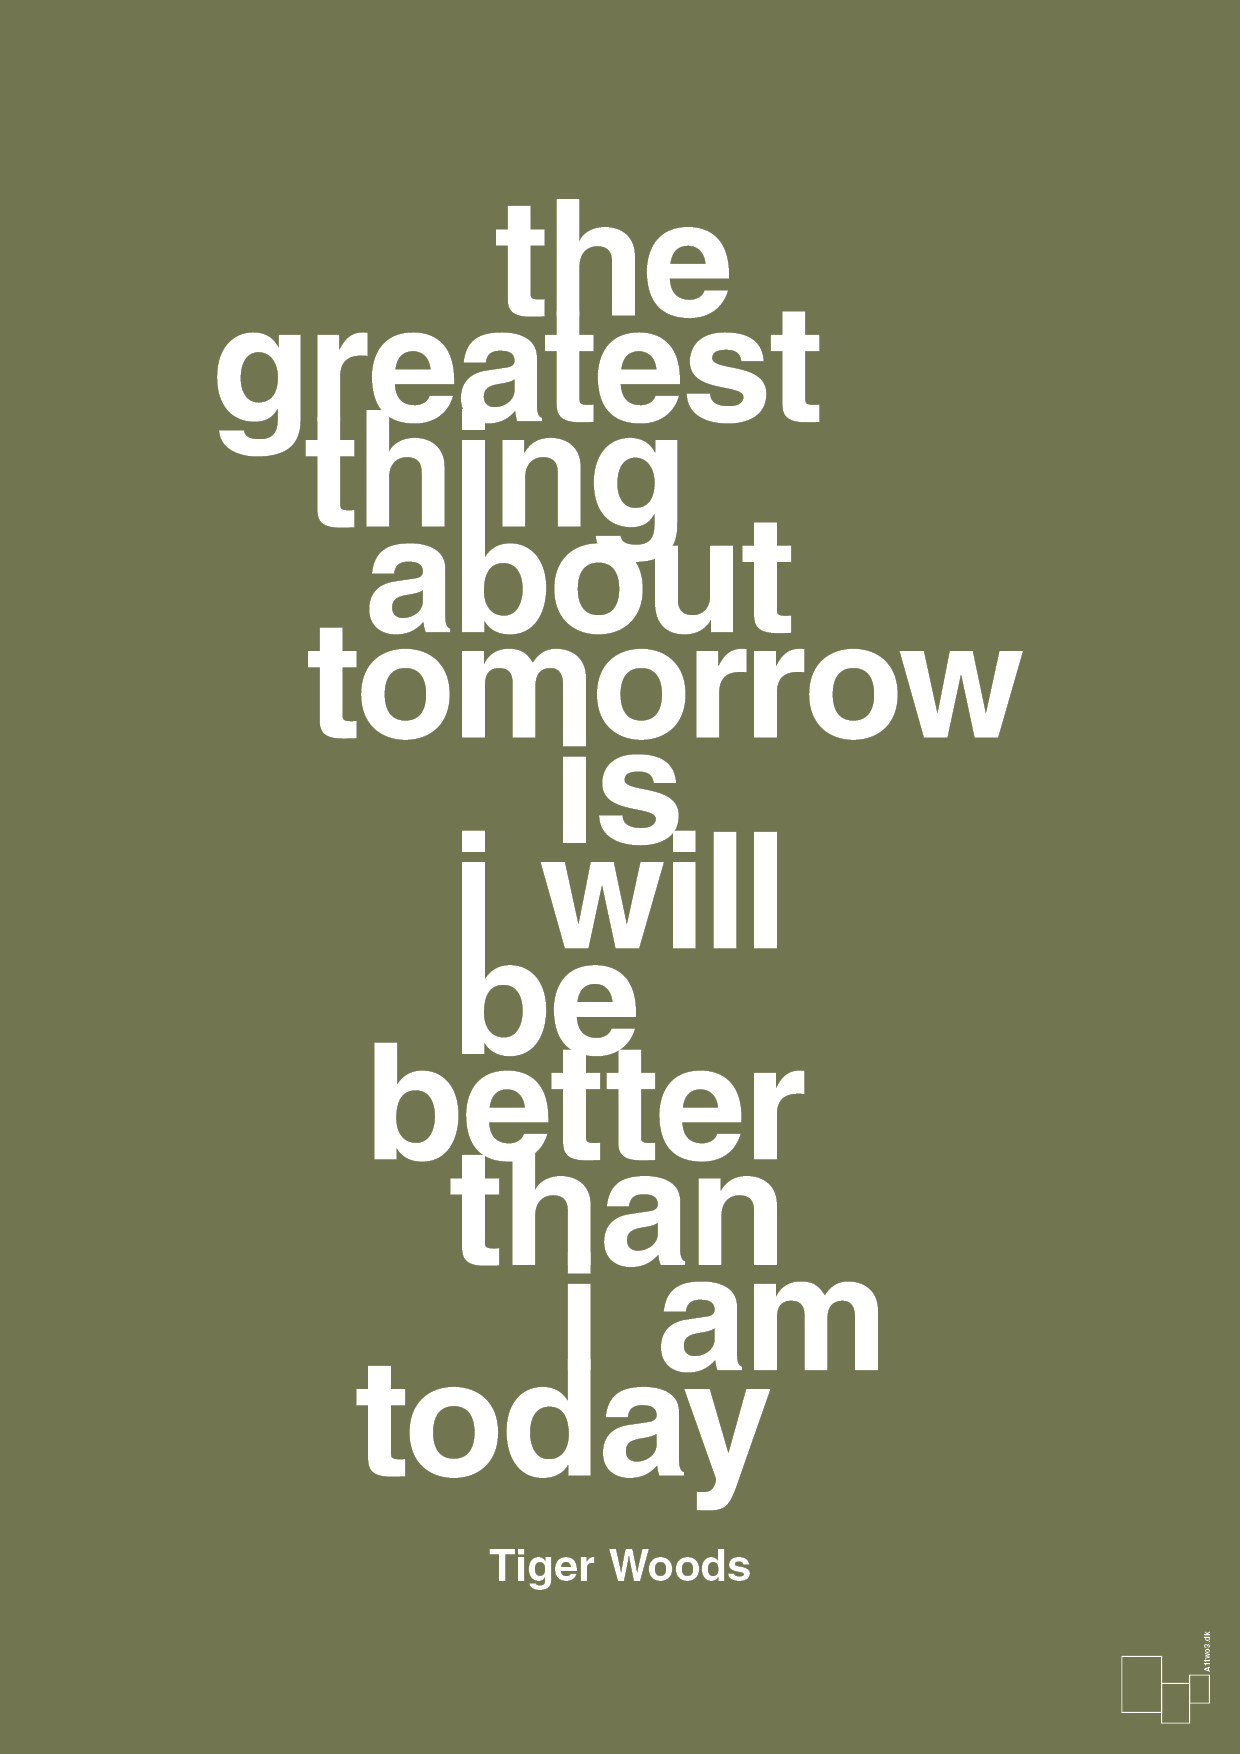 the greatest thing about tomorrow is i will be better than i am today - Plakat med Citater i Secret Meadow